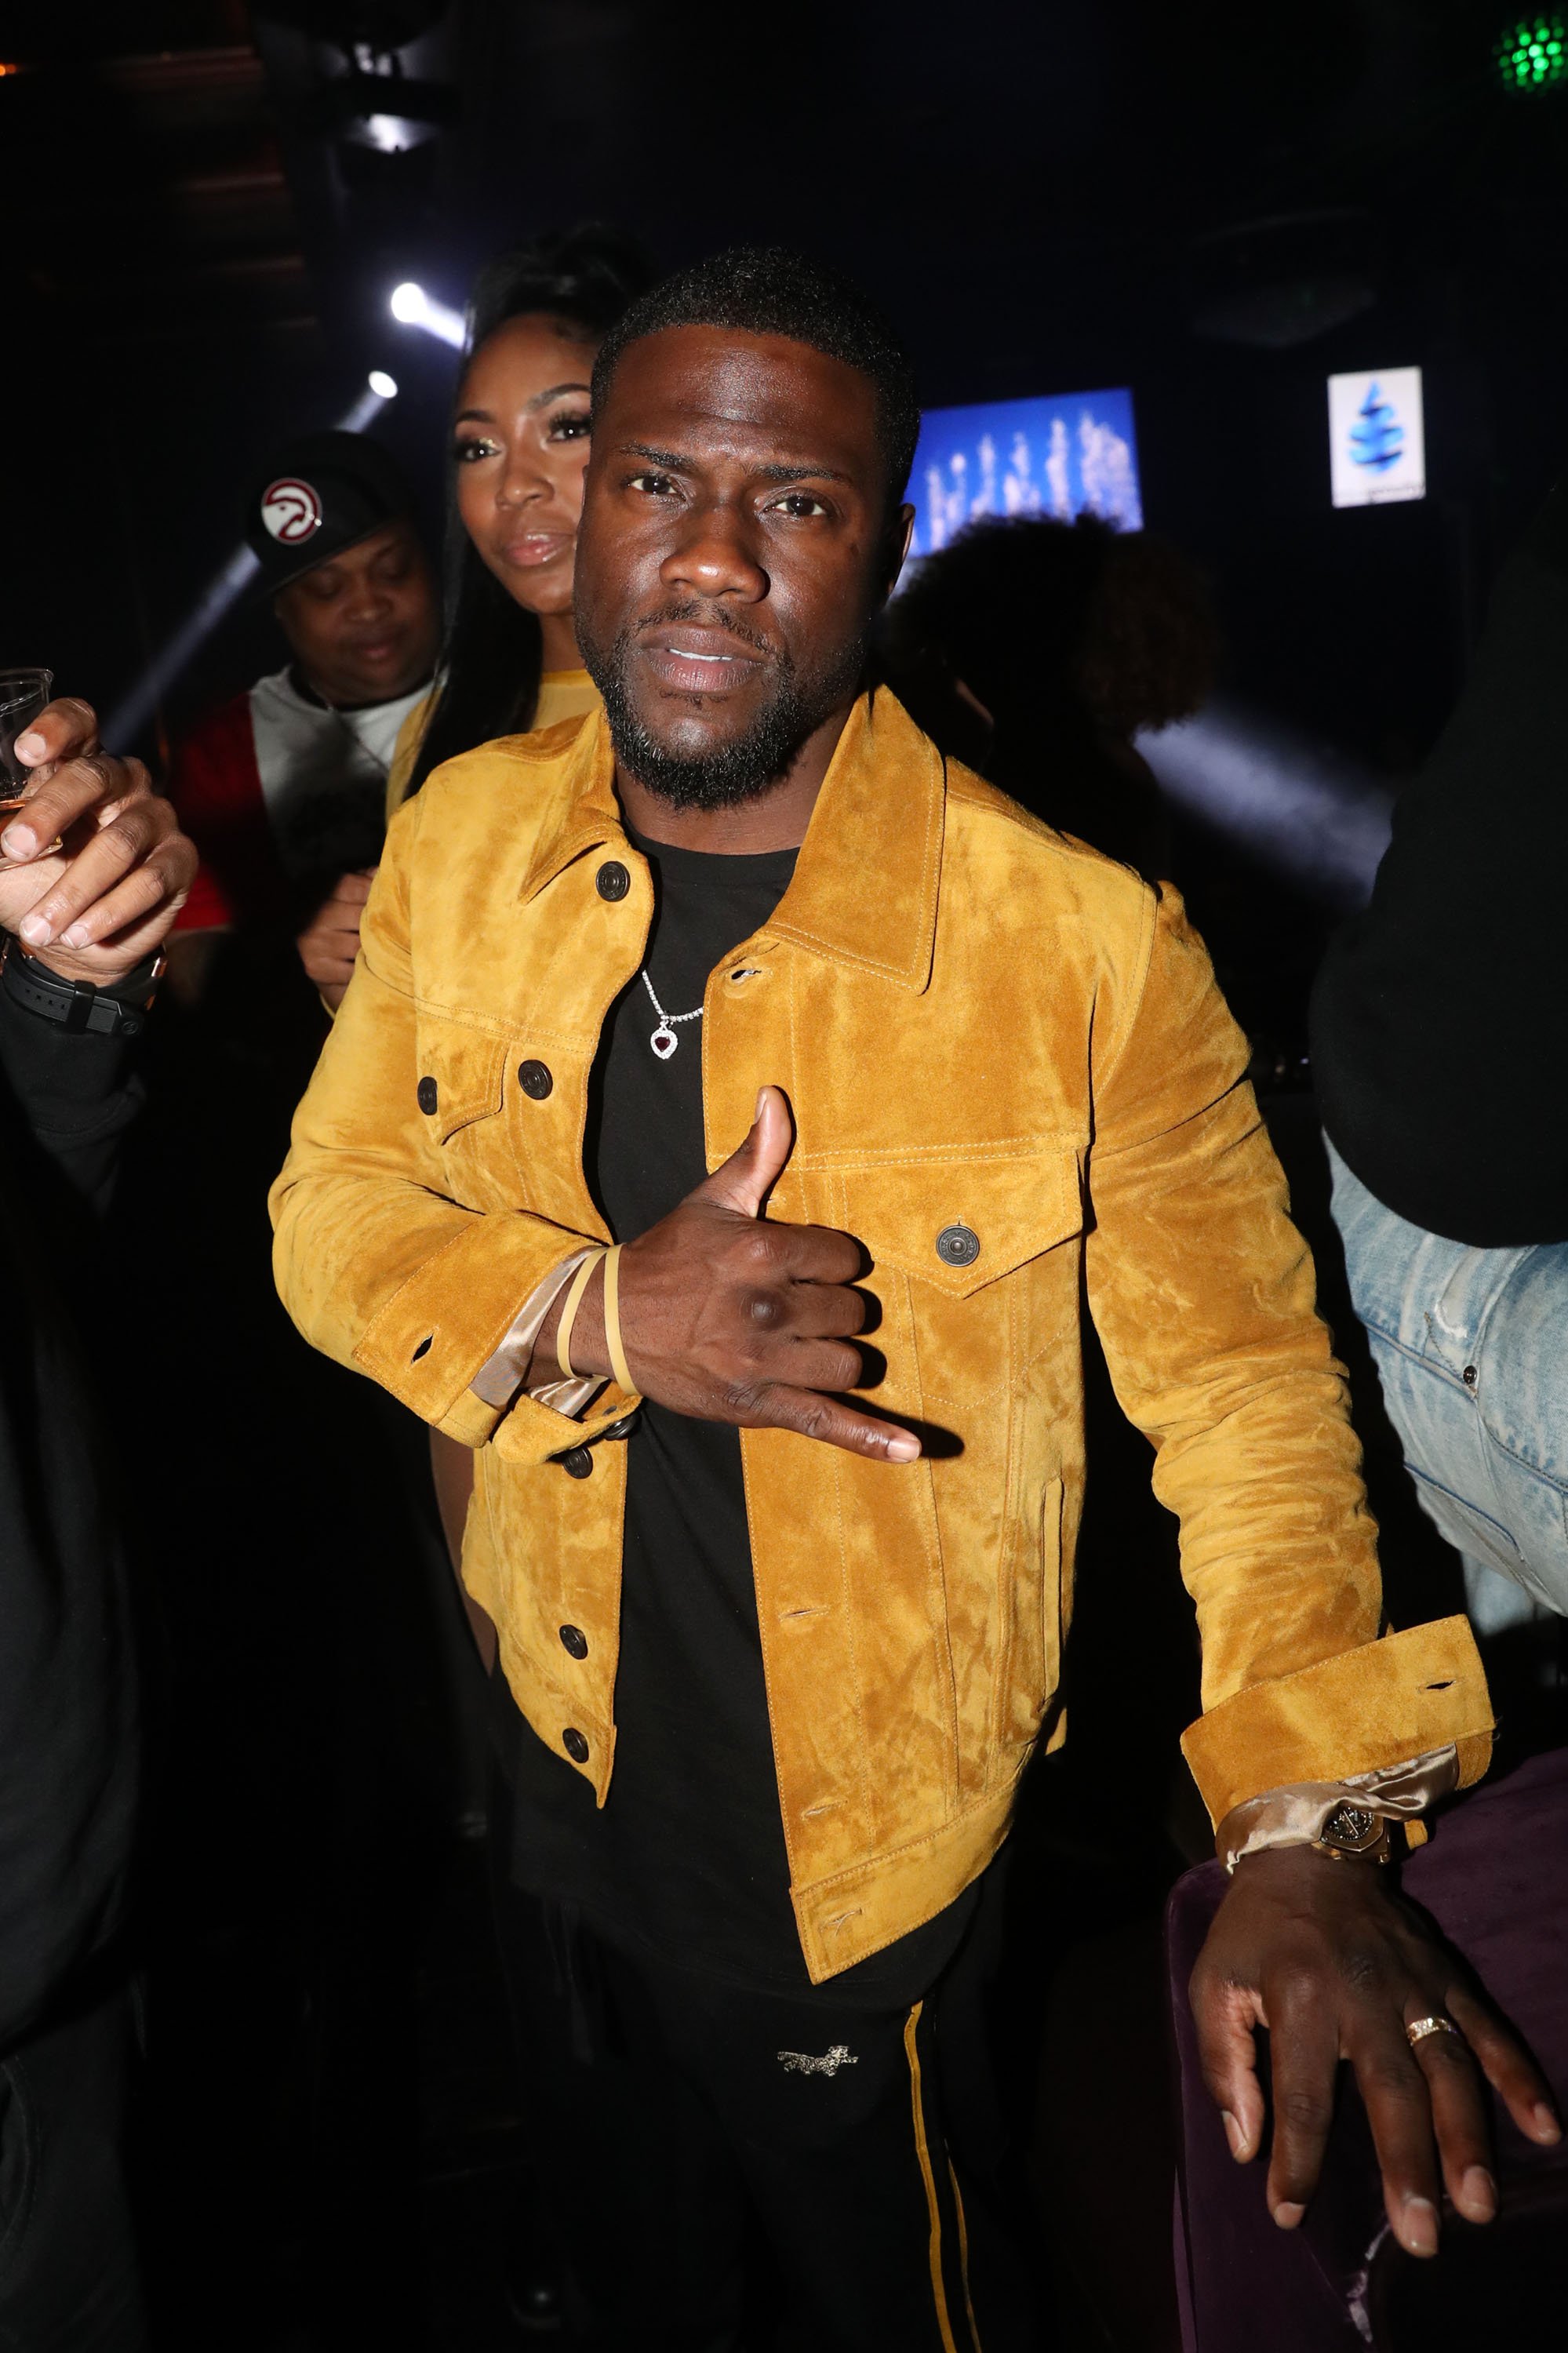 Kevin Hart Is All Smiles in Festive Photos With Wife and Children